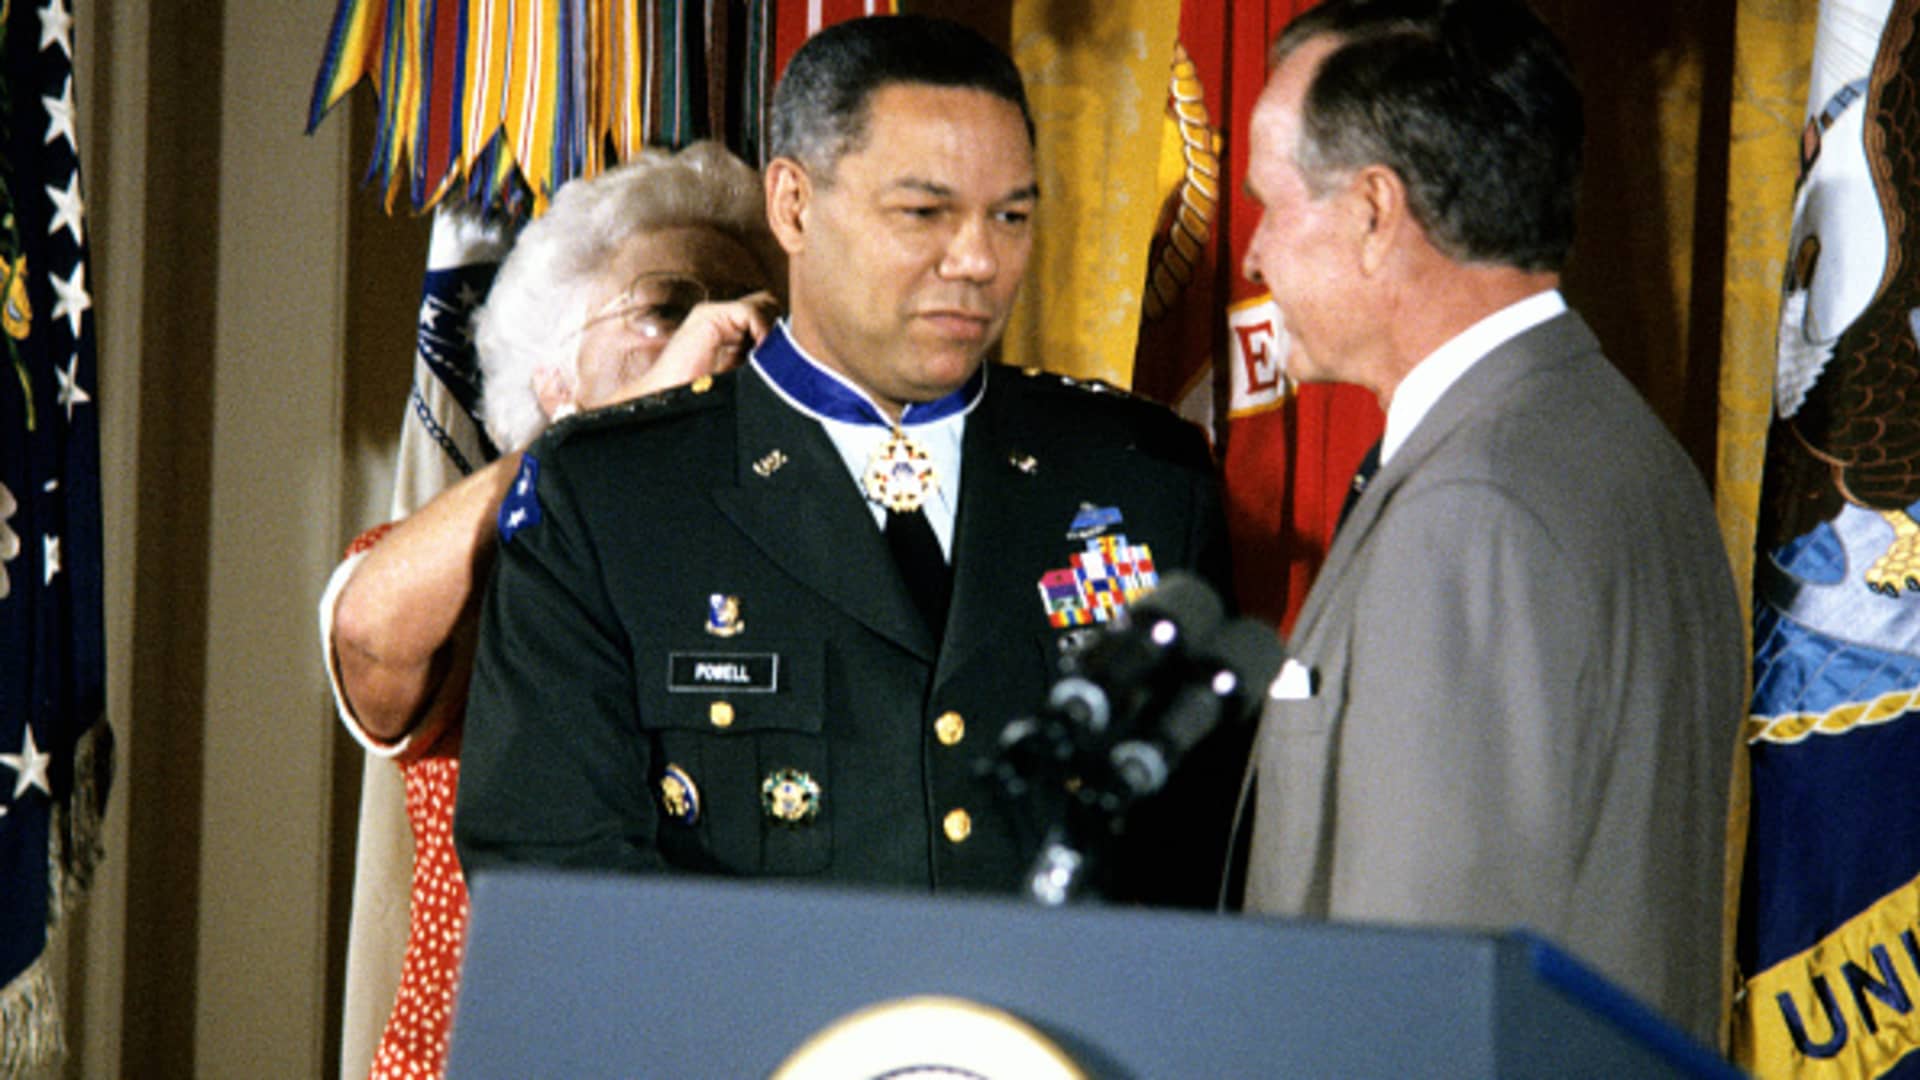 American First Lady Barbara Bush (1925 - 2018) fastens the Presidential Medal of Freedom around the neck of Chairman of the Joint Chiefs of Staff US Army General Colin Powell, as US President George HW Bush (1924 - 2018), watches during a ceremony in the White House's East Room, Washington DC, July 3, 1991.